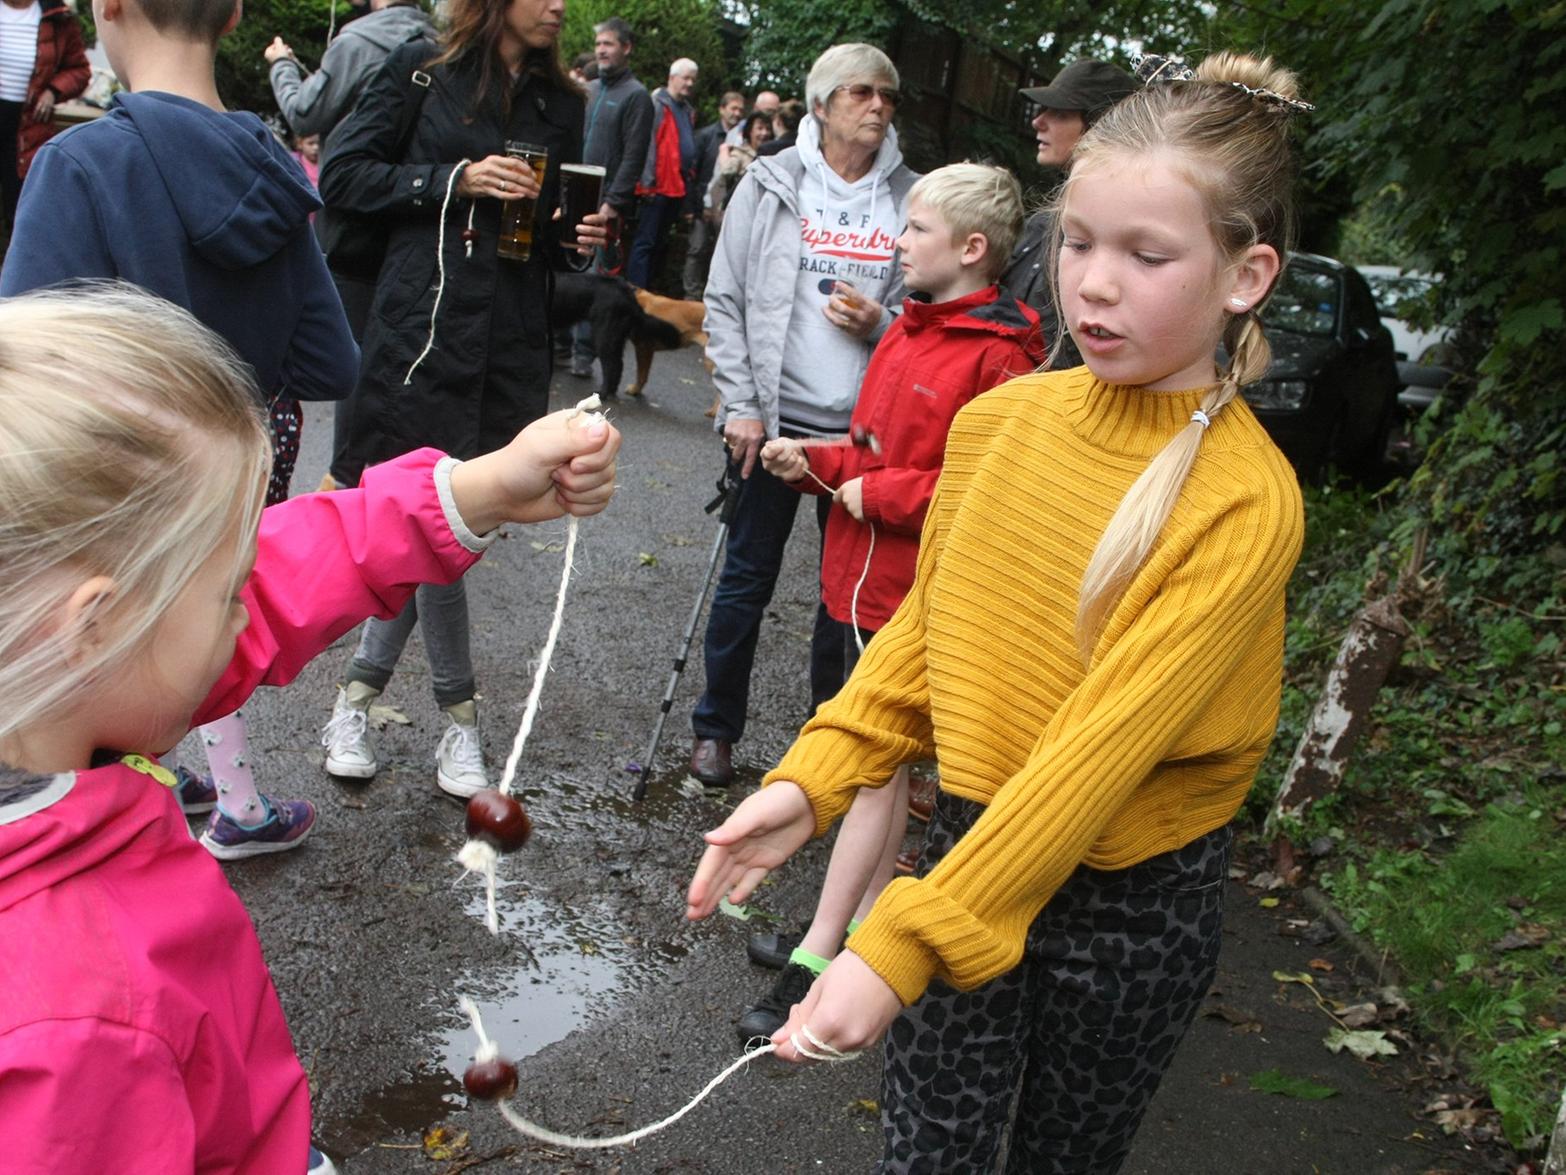 The annual conker competition was held at The Spotted Cow pub in Angmering.